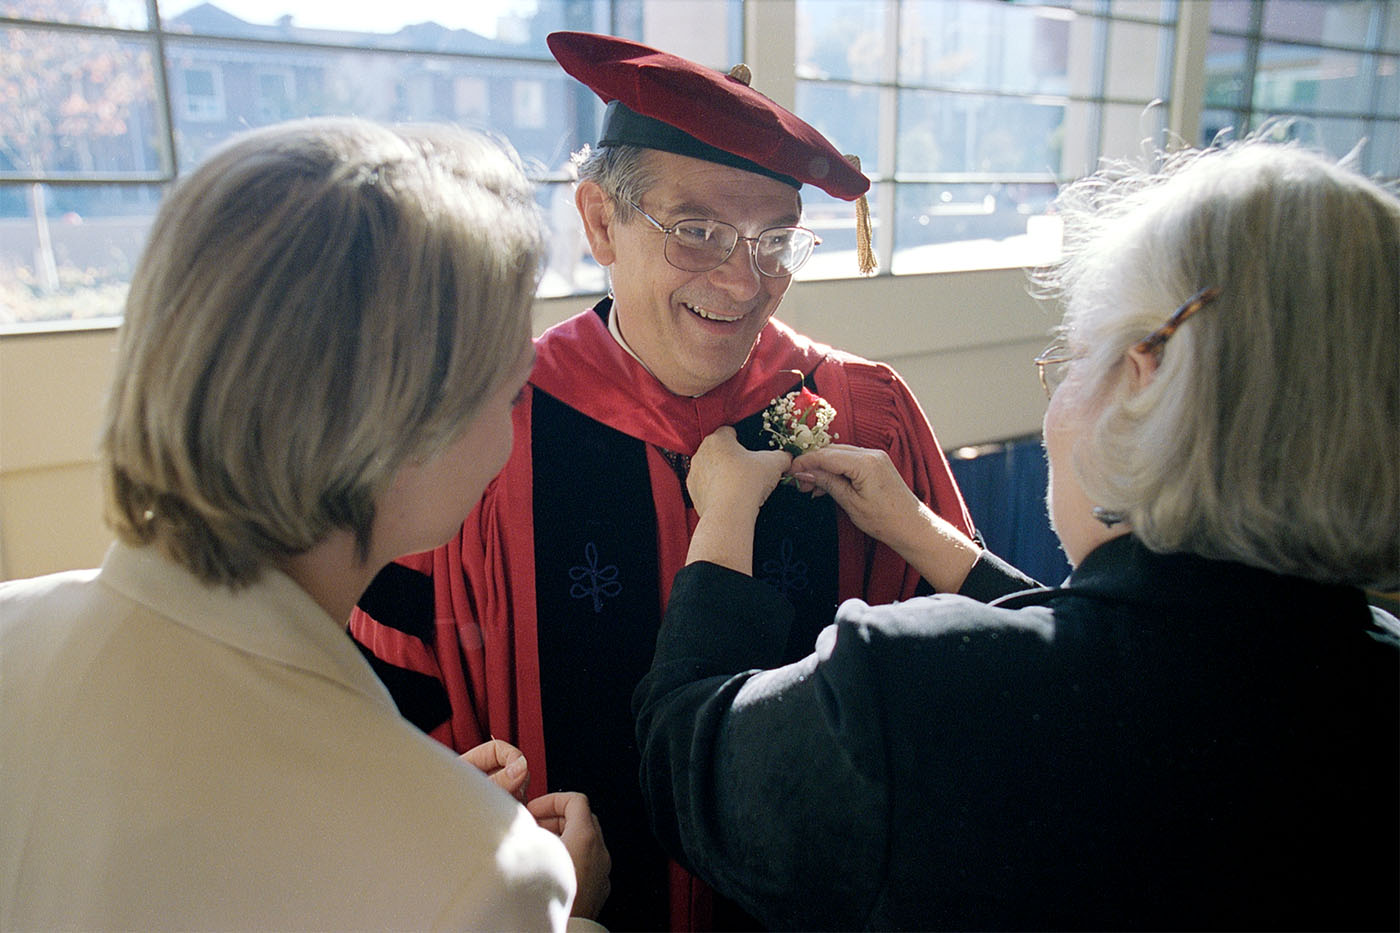 A faculty member getting a boutonniere (floral decoration) pinned to his gown at the Sullivan Hall Dedication Ceremony (1999)